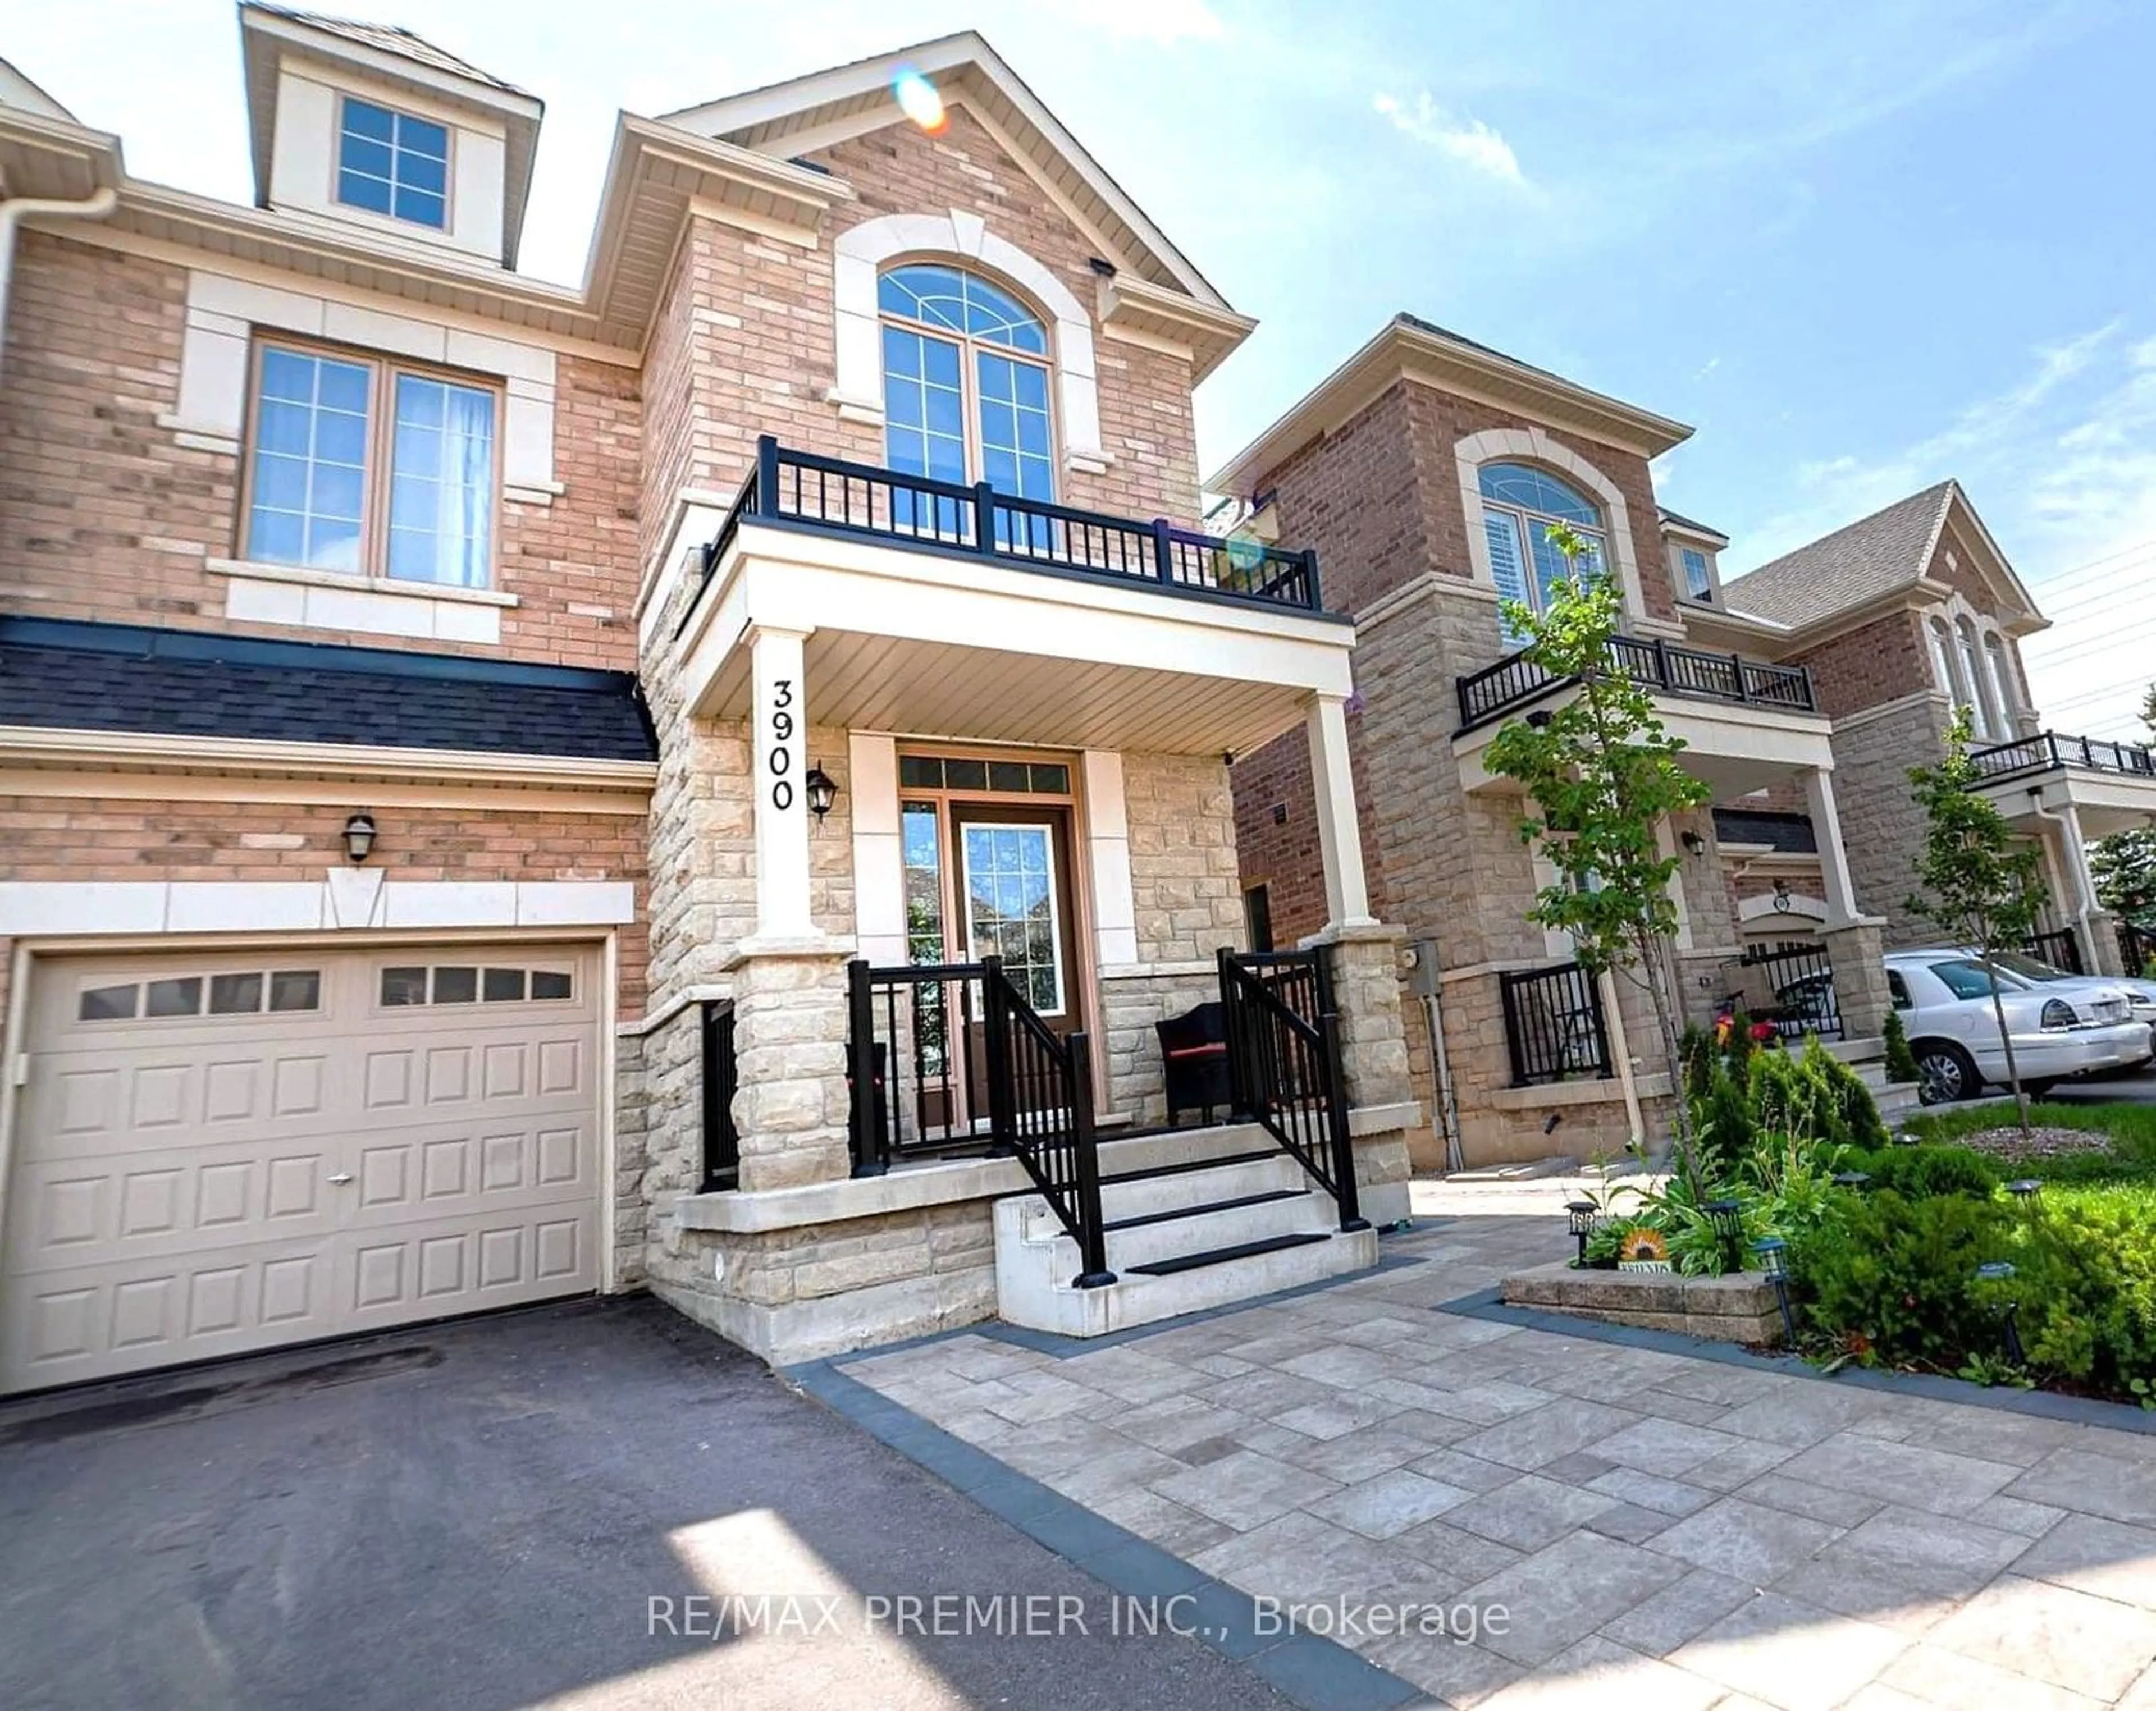 Home with brick exterior material for 3900 Arvona Pl, Mississauga Ontario L5M 0Y5